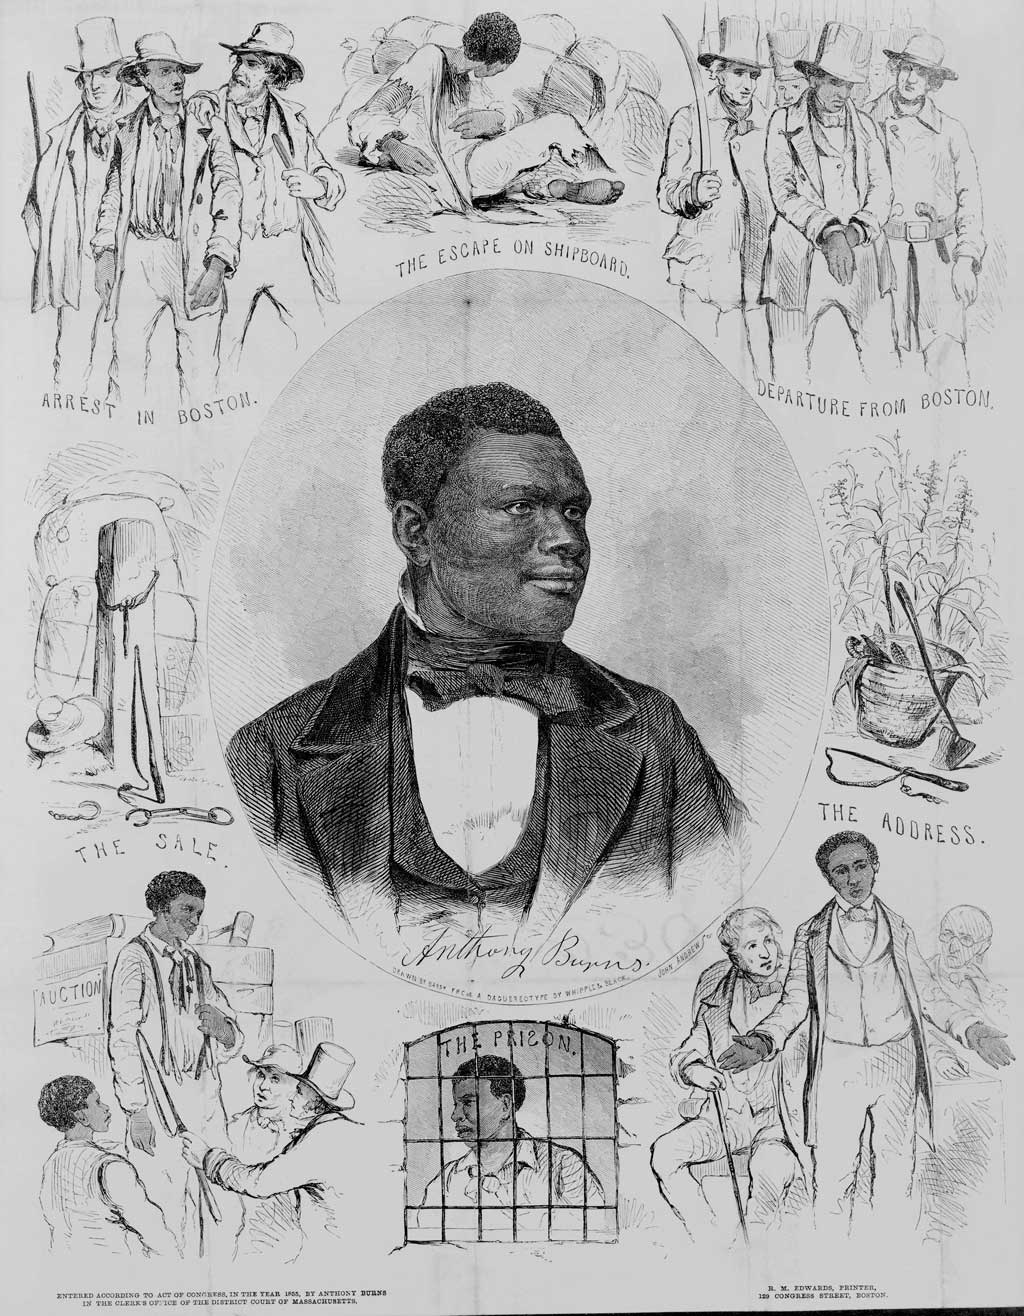 Portrait of Anthony Burns surrounded by scenes from his life. These include (clockwise from lower left): the sale of the youthful Burns at auction, a whipping post with bales of cotton, his arrest in Boston on May 24, 1854, his escape from Richmond on shipboard, his departure from Boston escorted by federal marshals and troops, Burns's 'address' (to the court?), and finally Burns in prison.